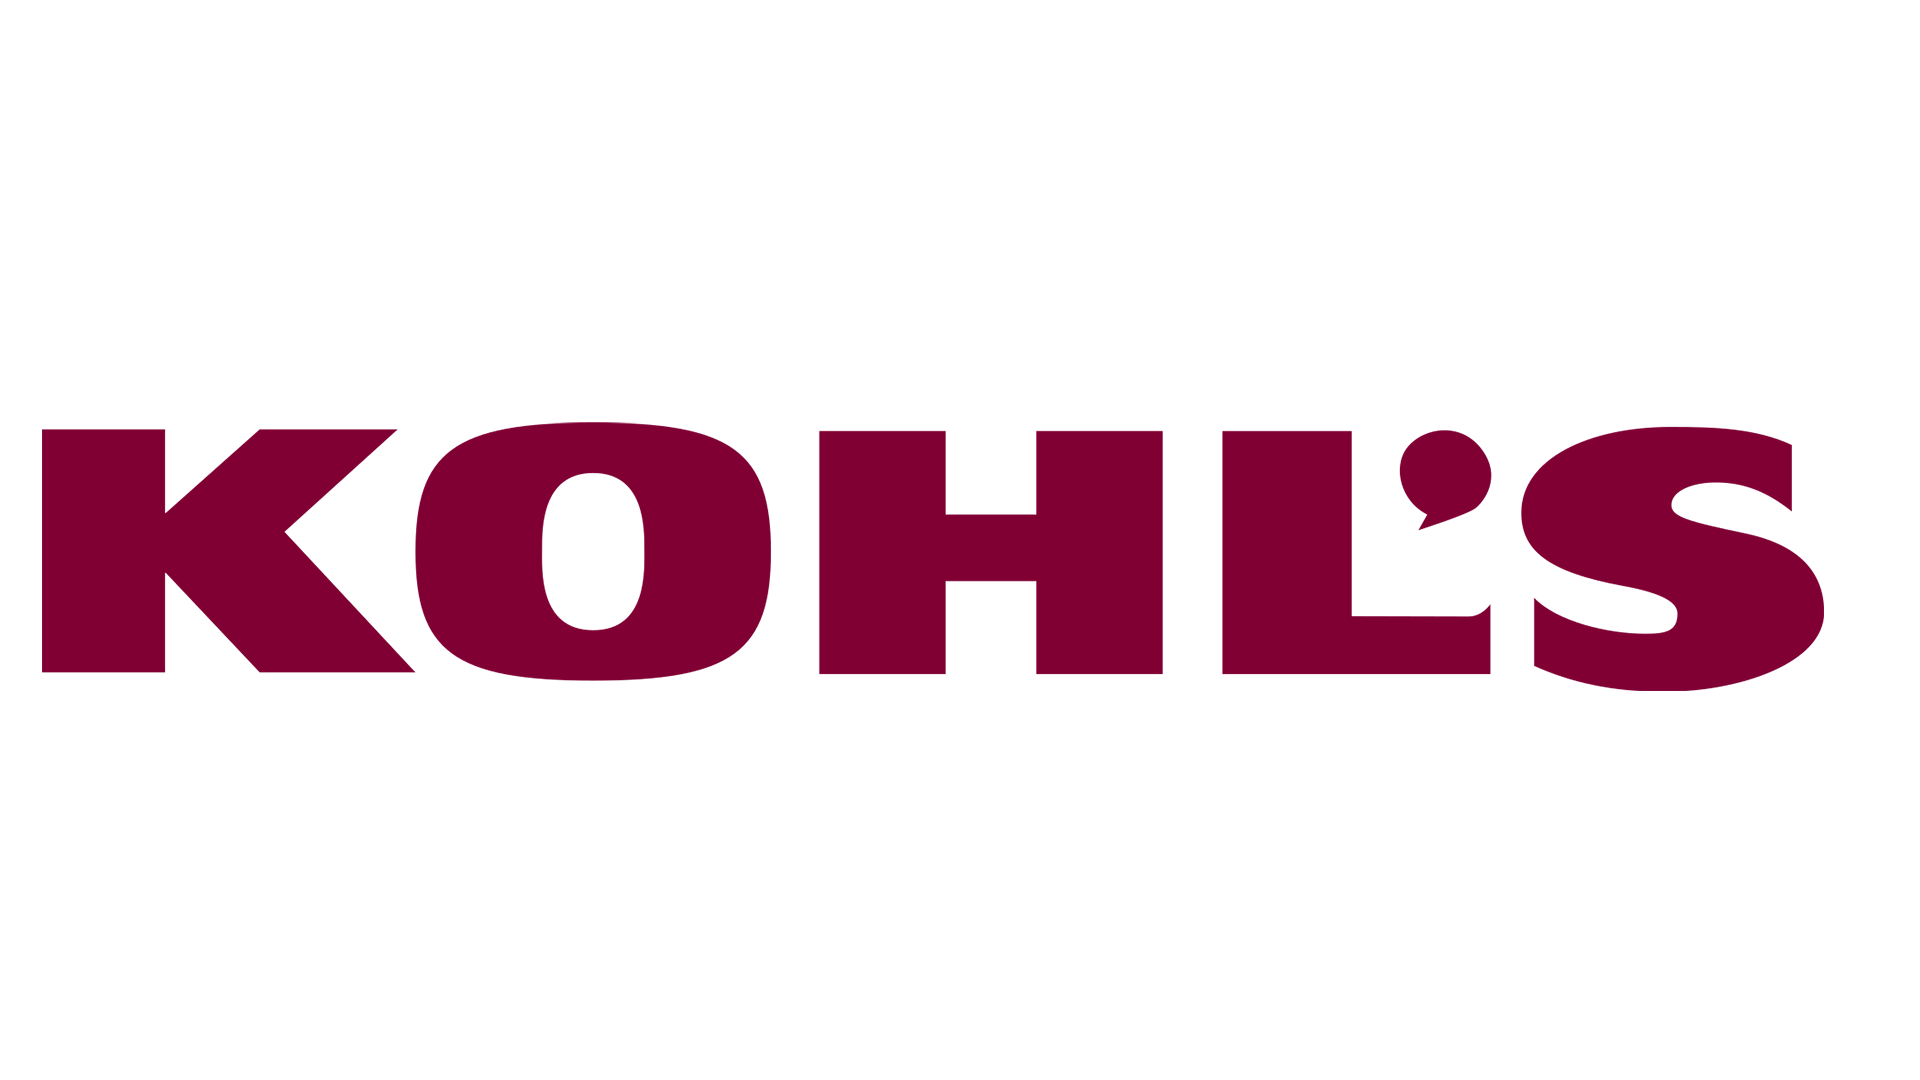 Kohls Stacking Offers: $10 off $50 in Home + 15% Off + Earn $15 in Kohls Cash on $50 + Free store pickup or free shipping on orders over $75